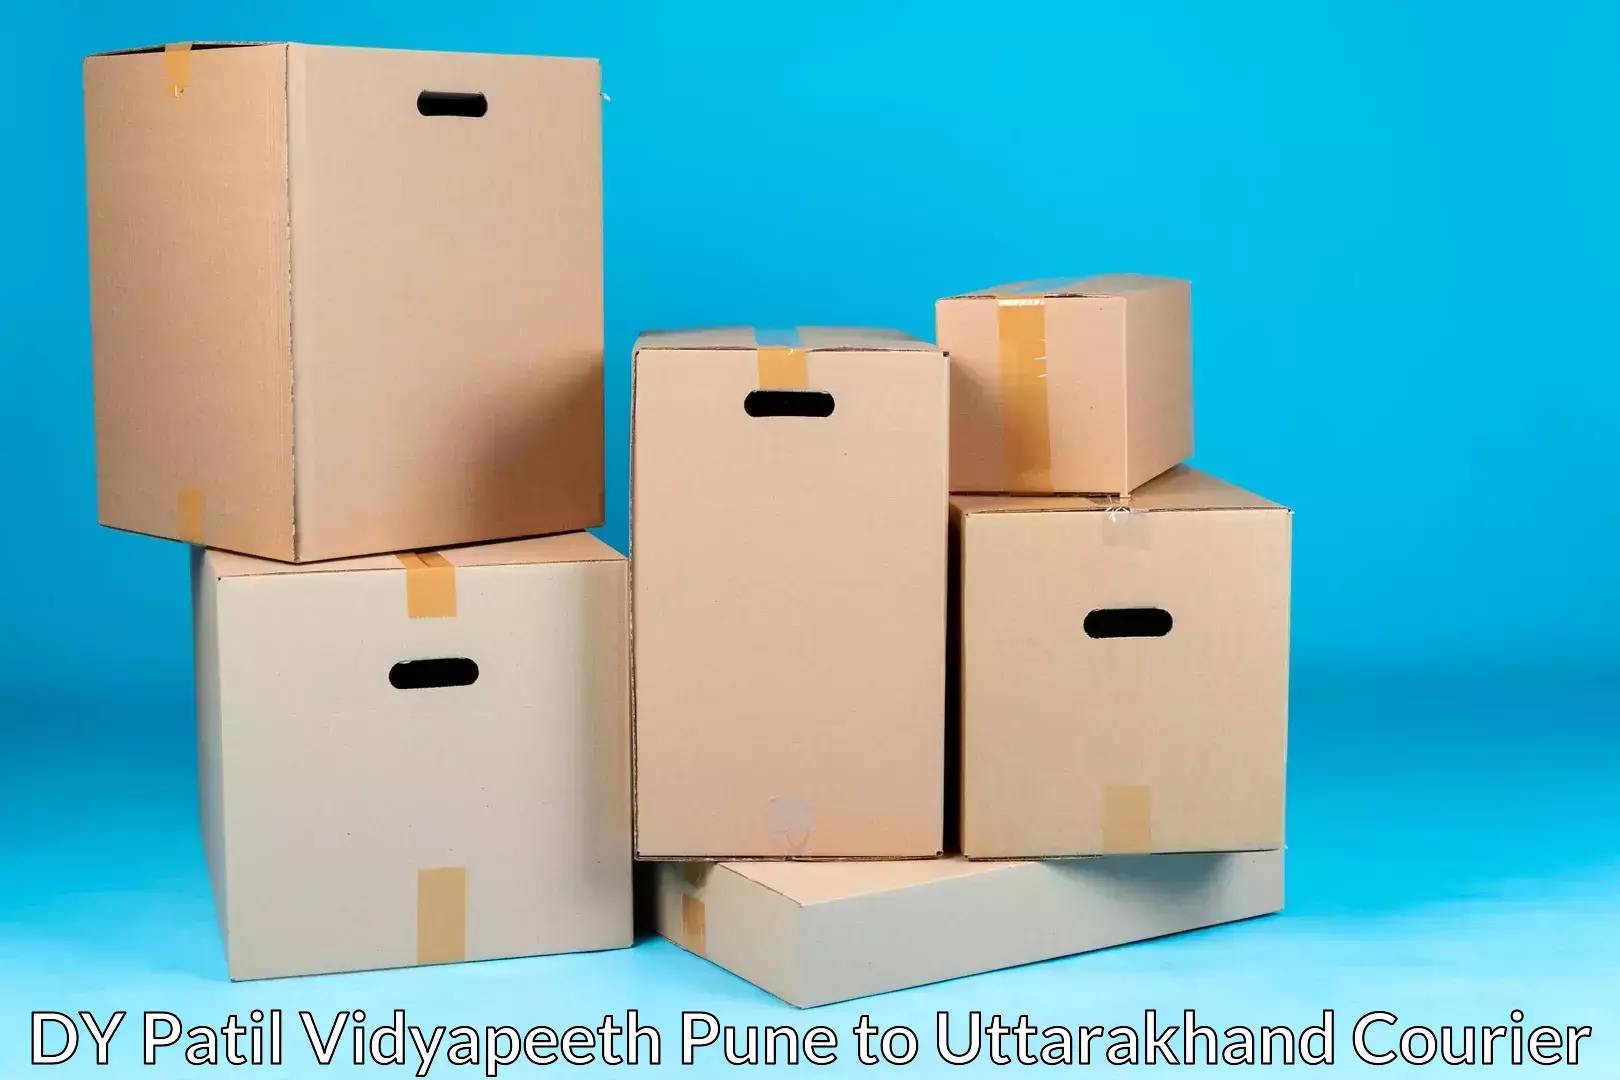 Professional packing services DY Patil Vidyapeeth Pune to Uttarakhand